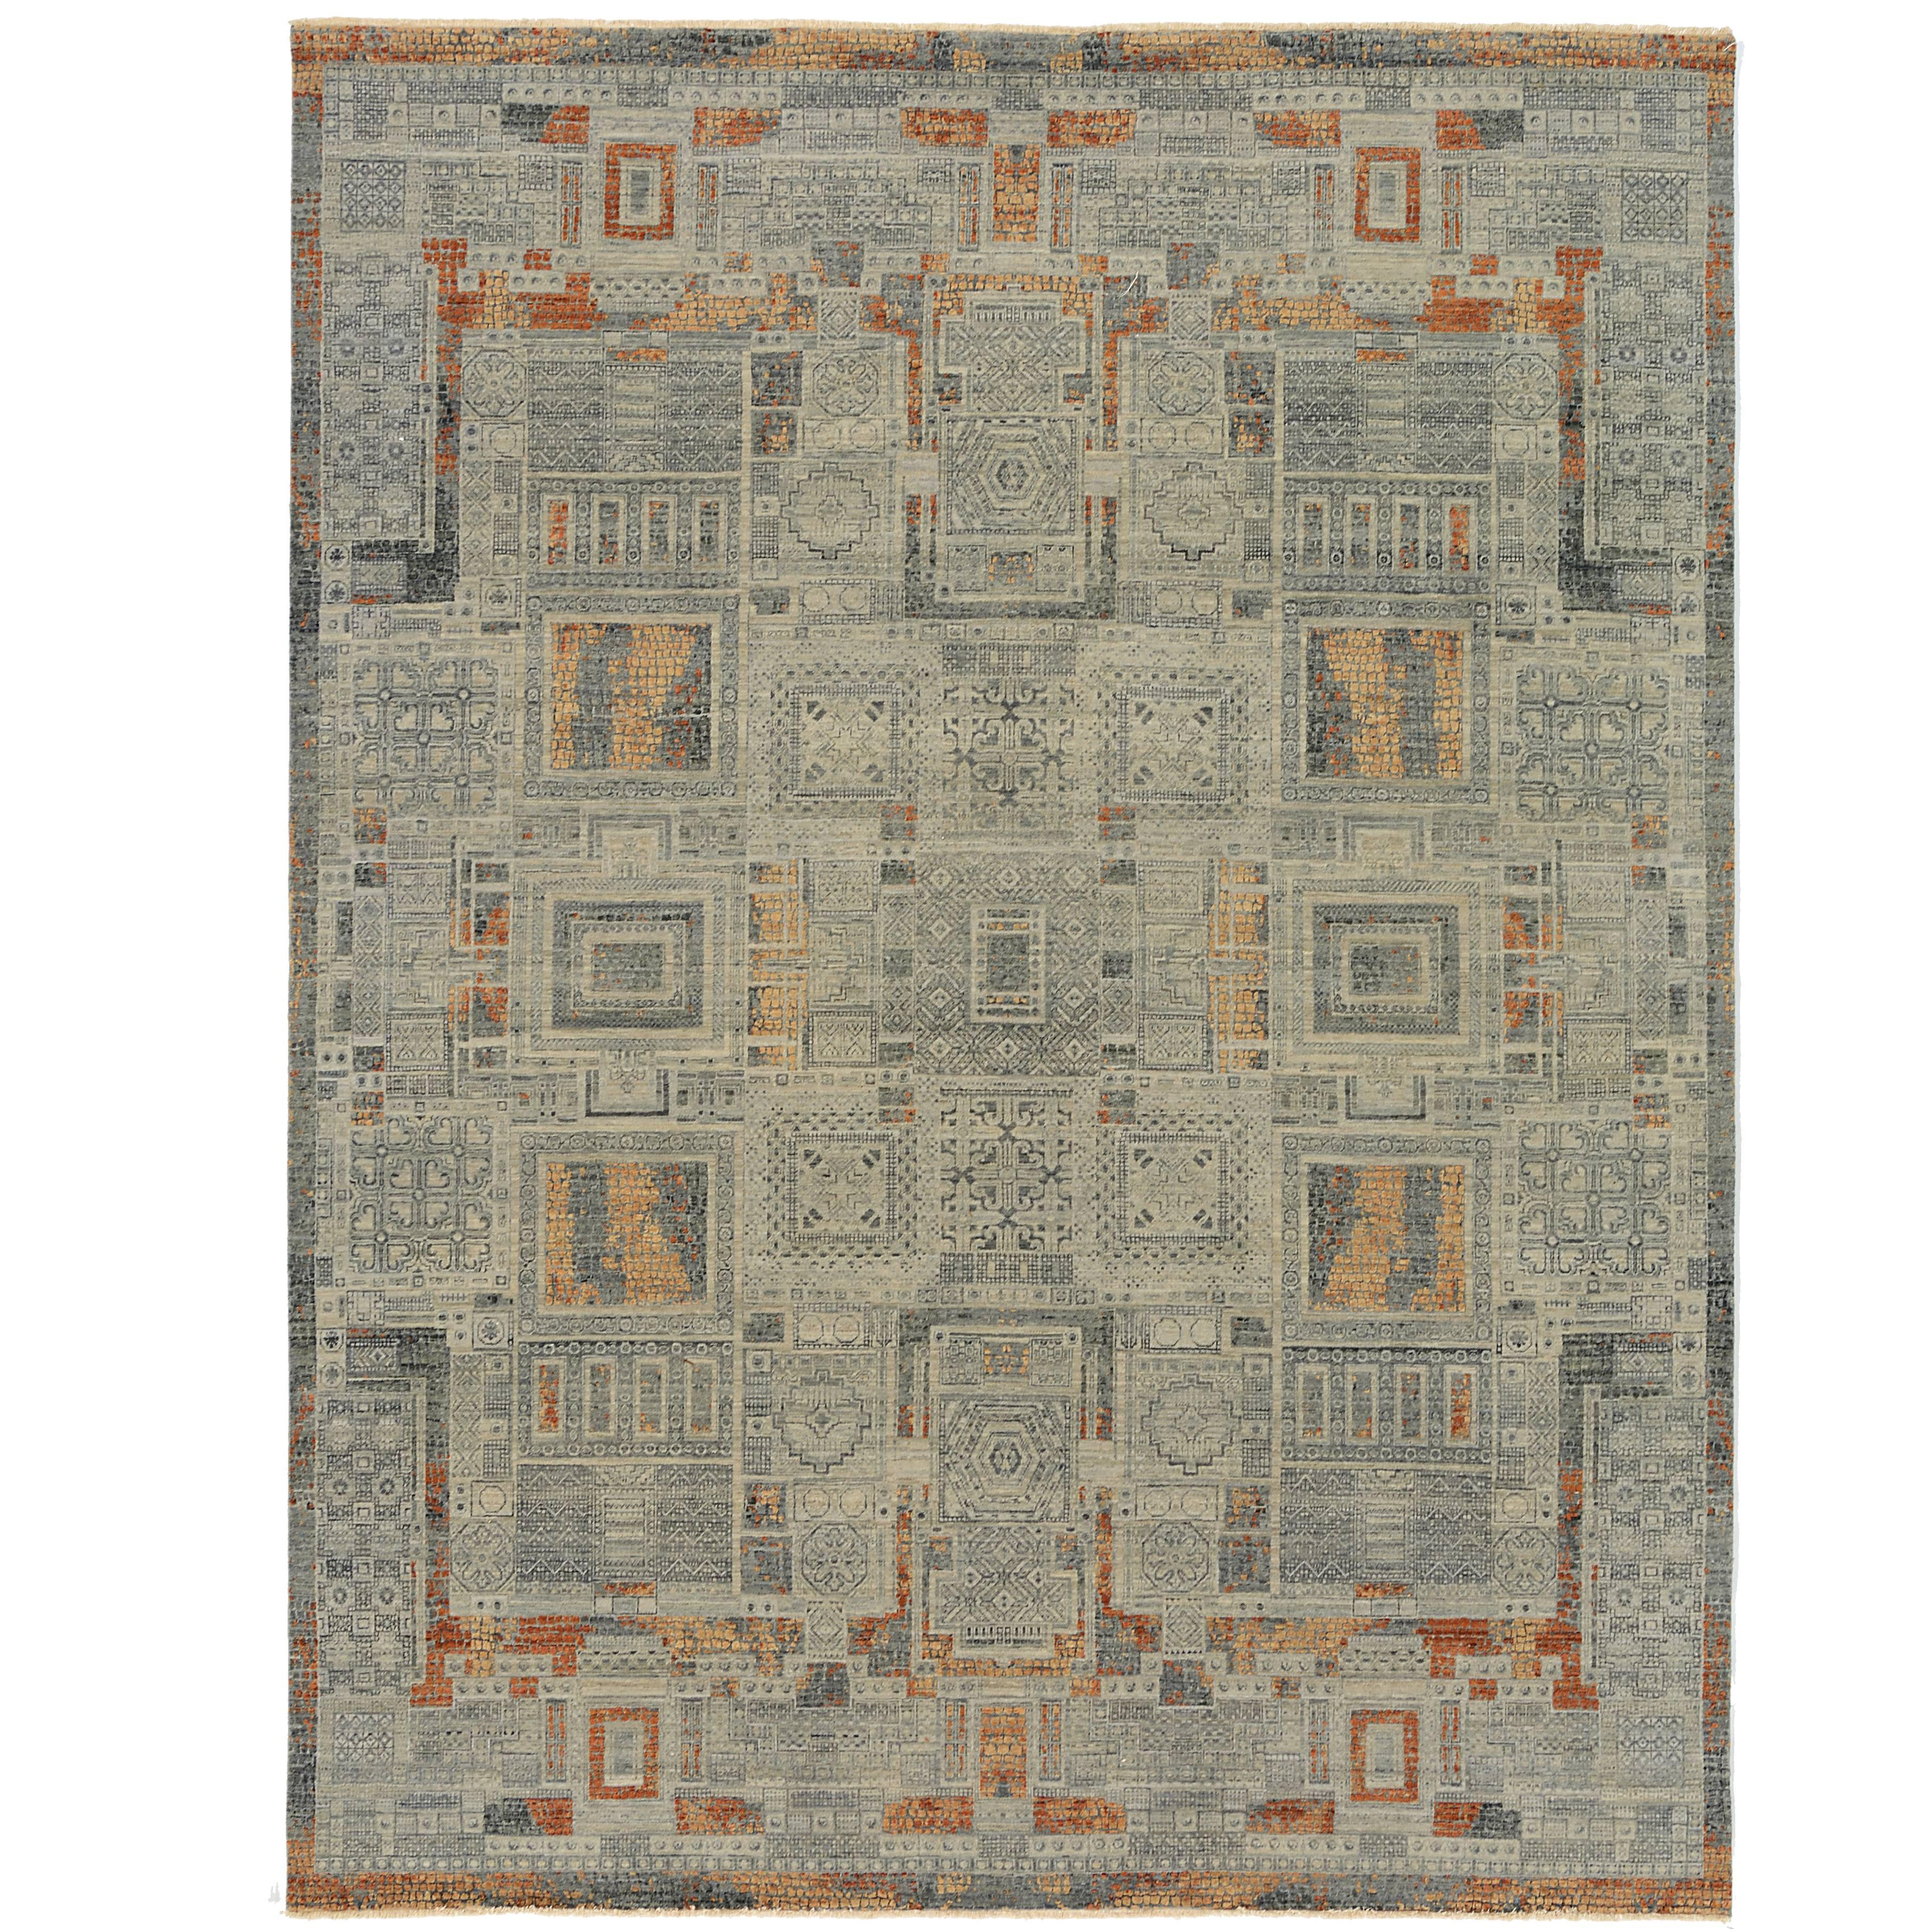 Luke Irwin Rugs, Marcus, Mosaic Collection For Sale